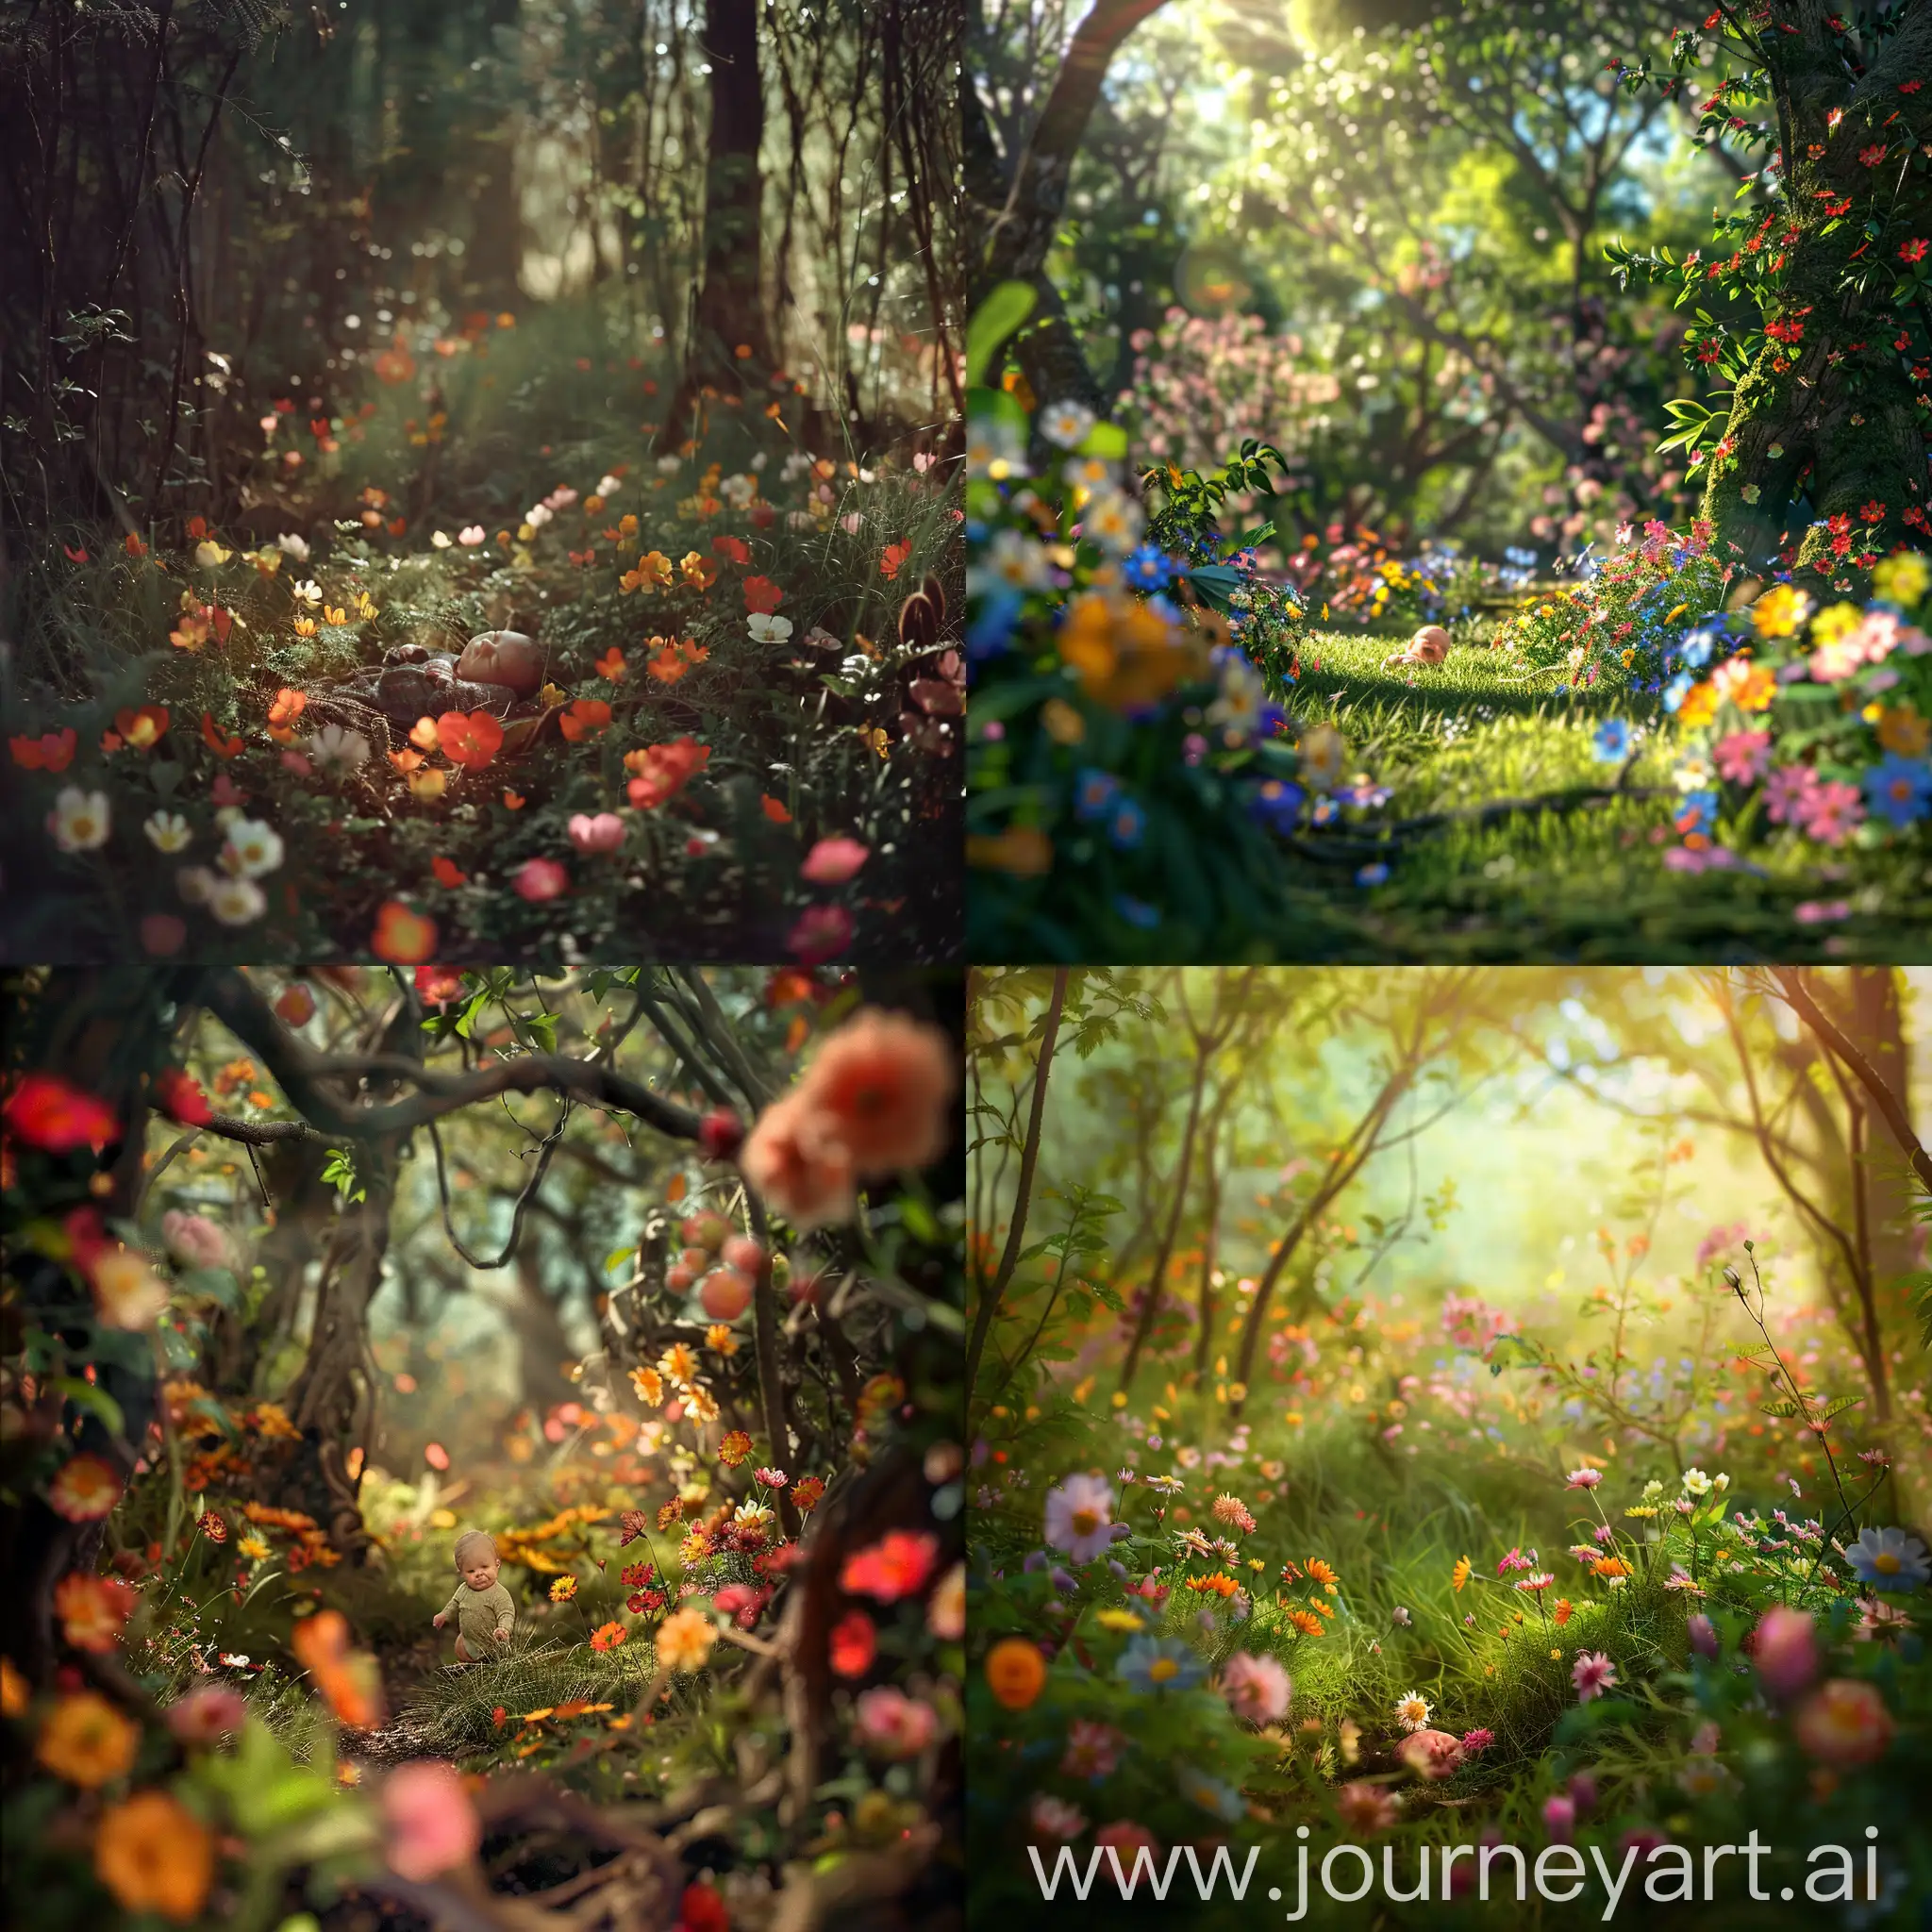 Vitus-Birth-in-a-Joyous-Blooming-Forest